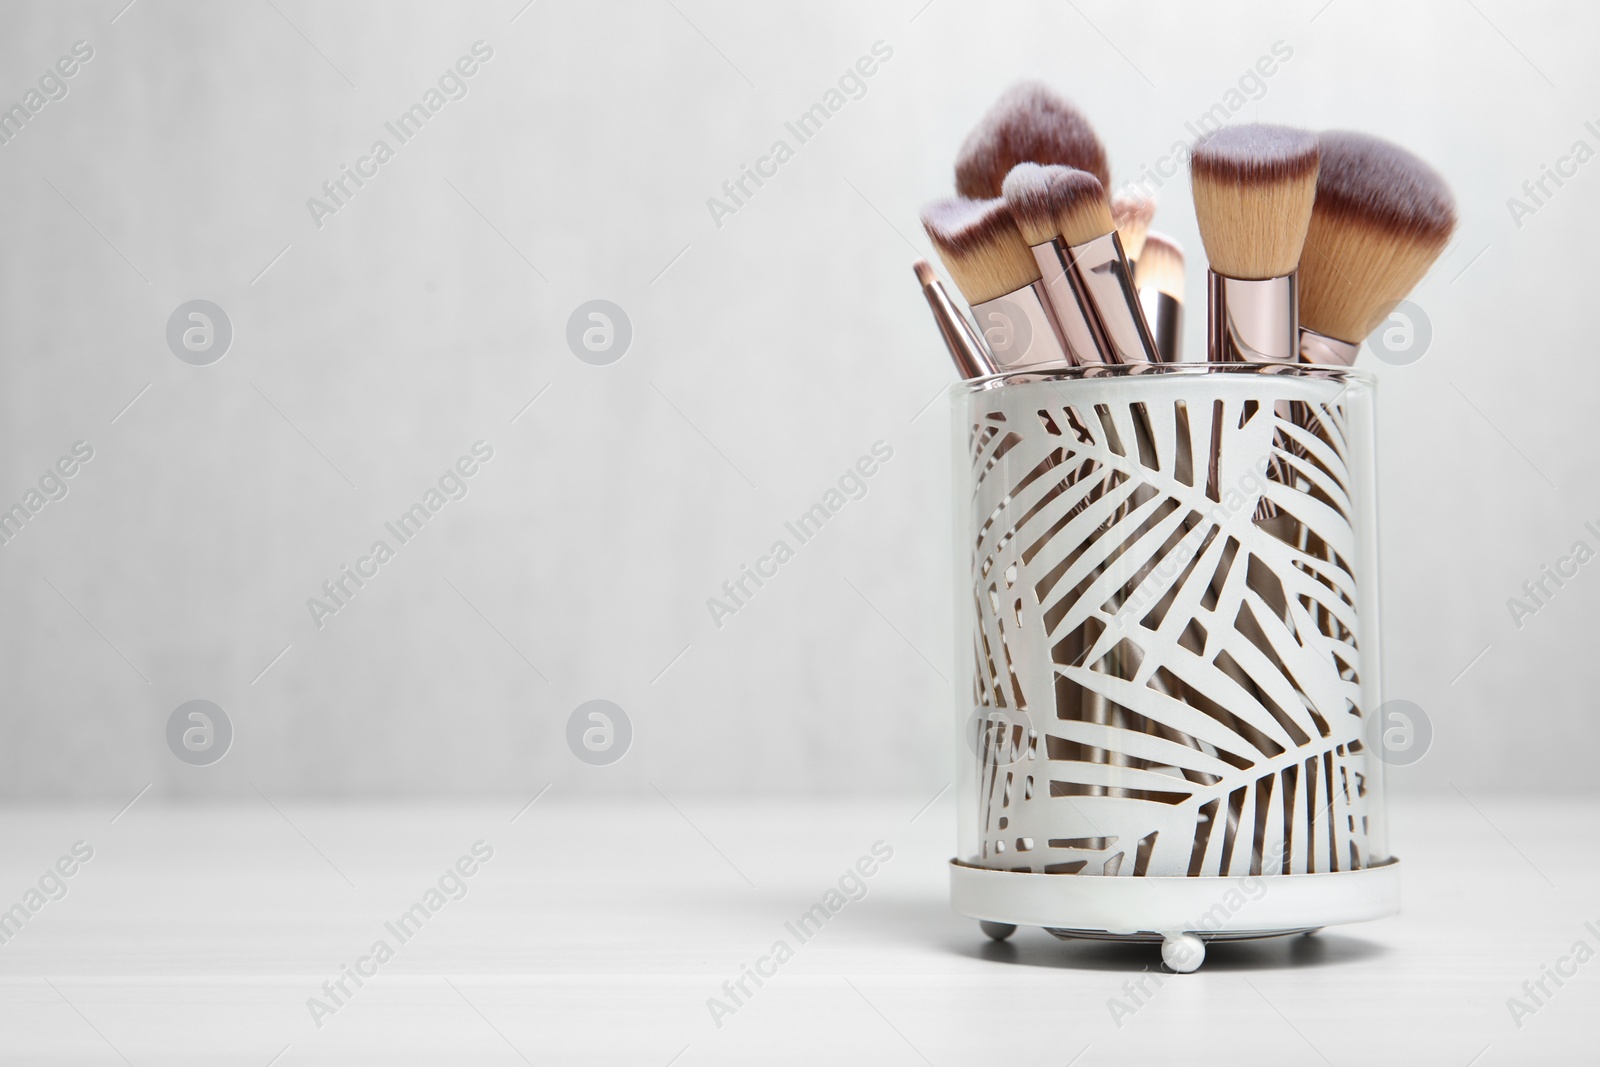 Photo of Organizer with professional makeup brushes on light table. Space for text